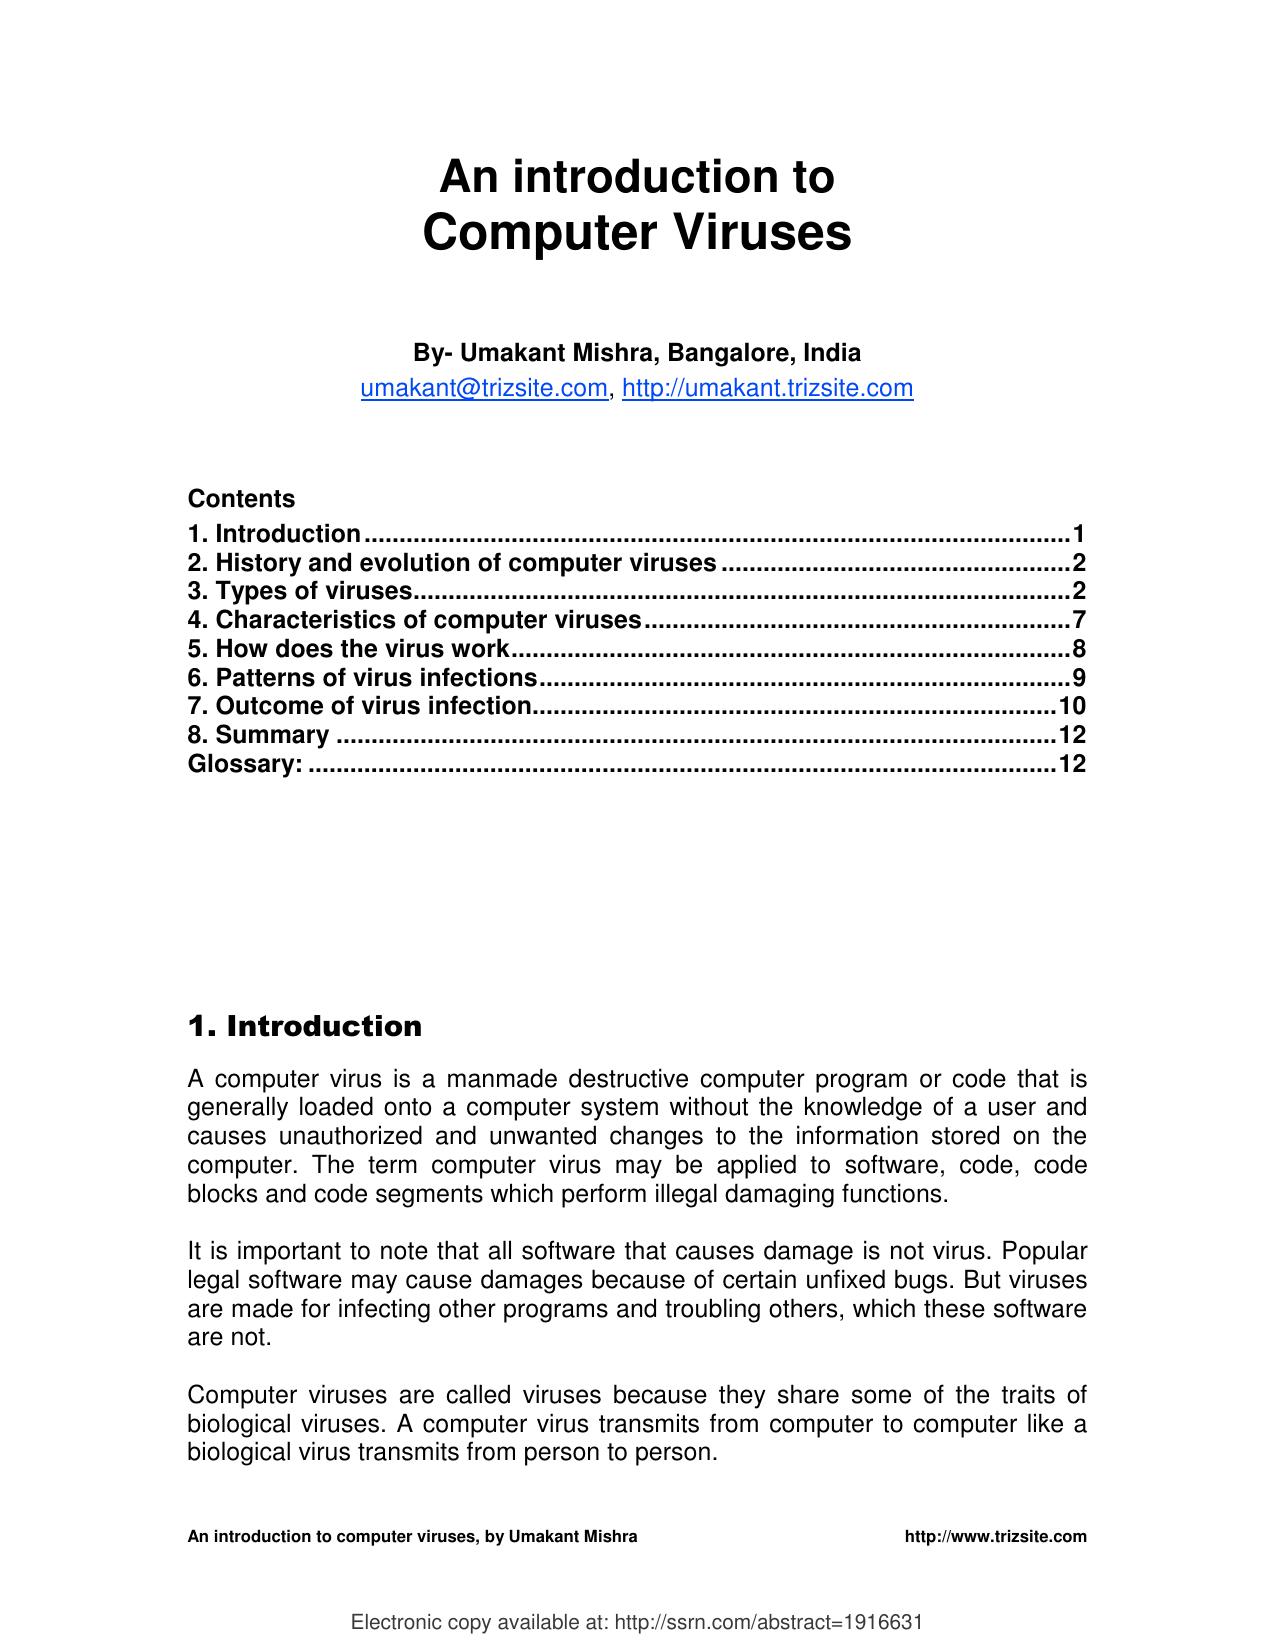 Introduction to computer viruses